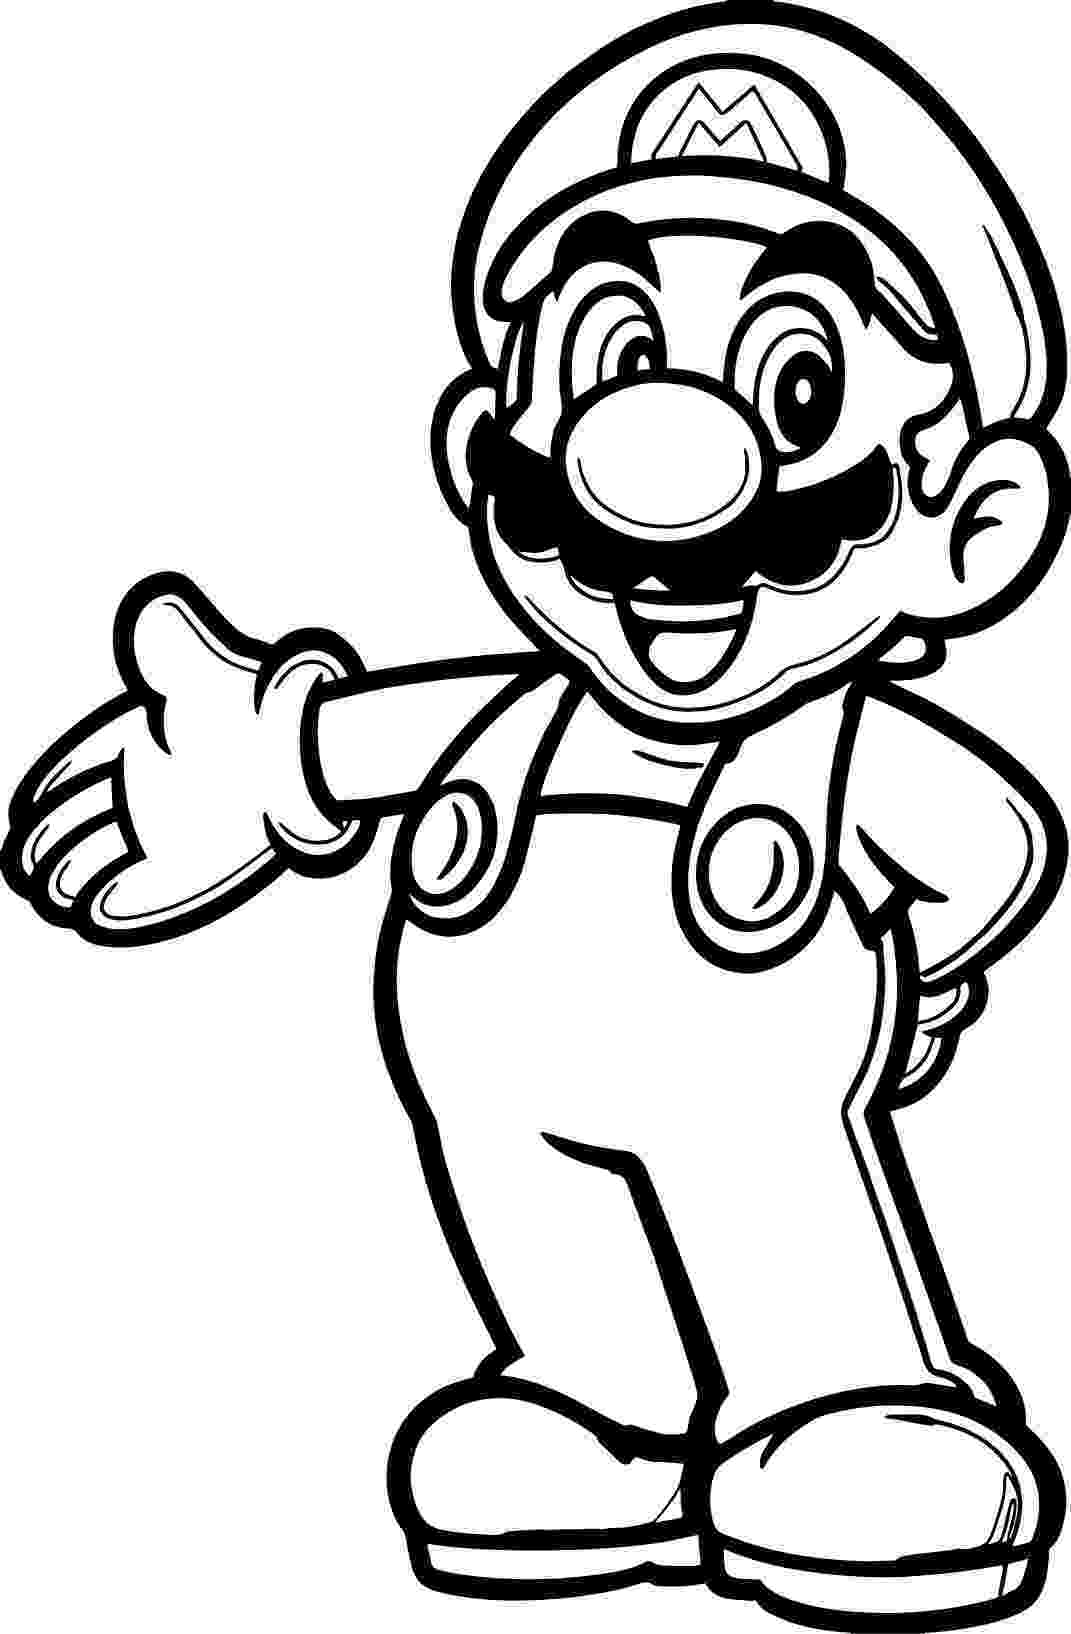 super mario coloring book super mario coloring pages free printable coloring pages mario book super coloring 